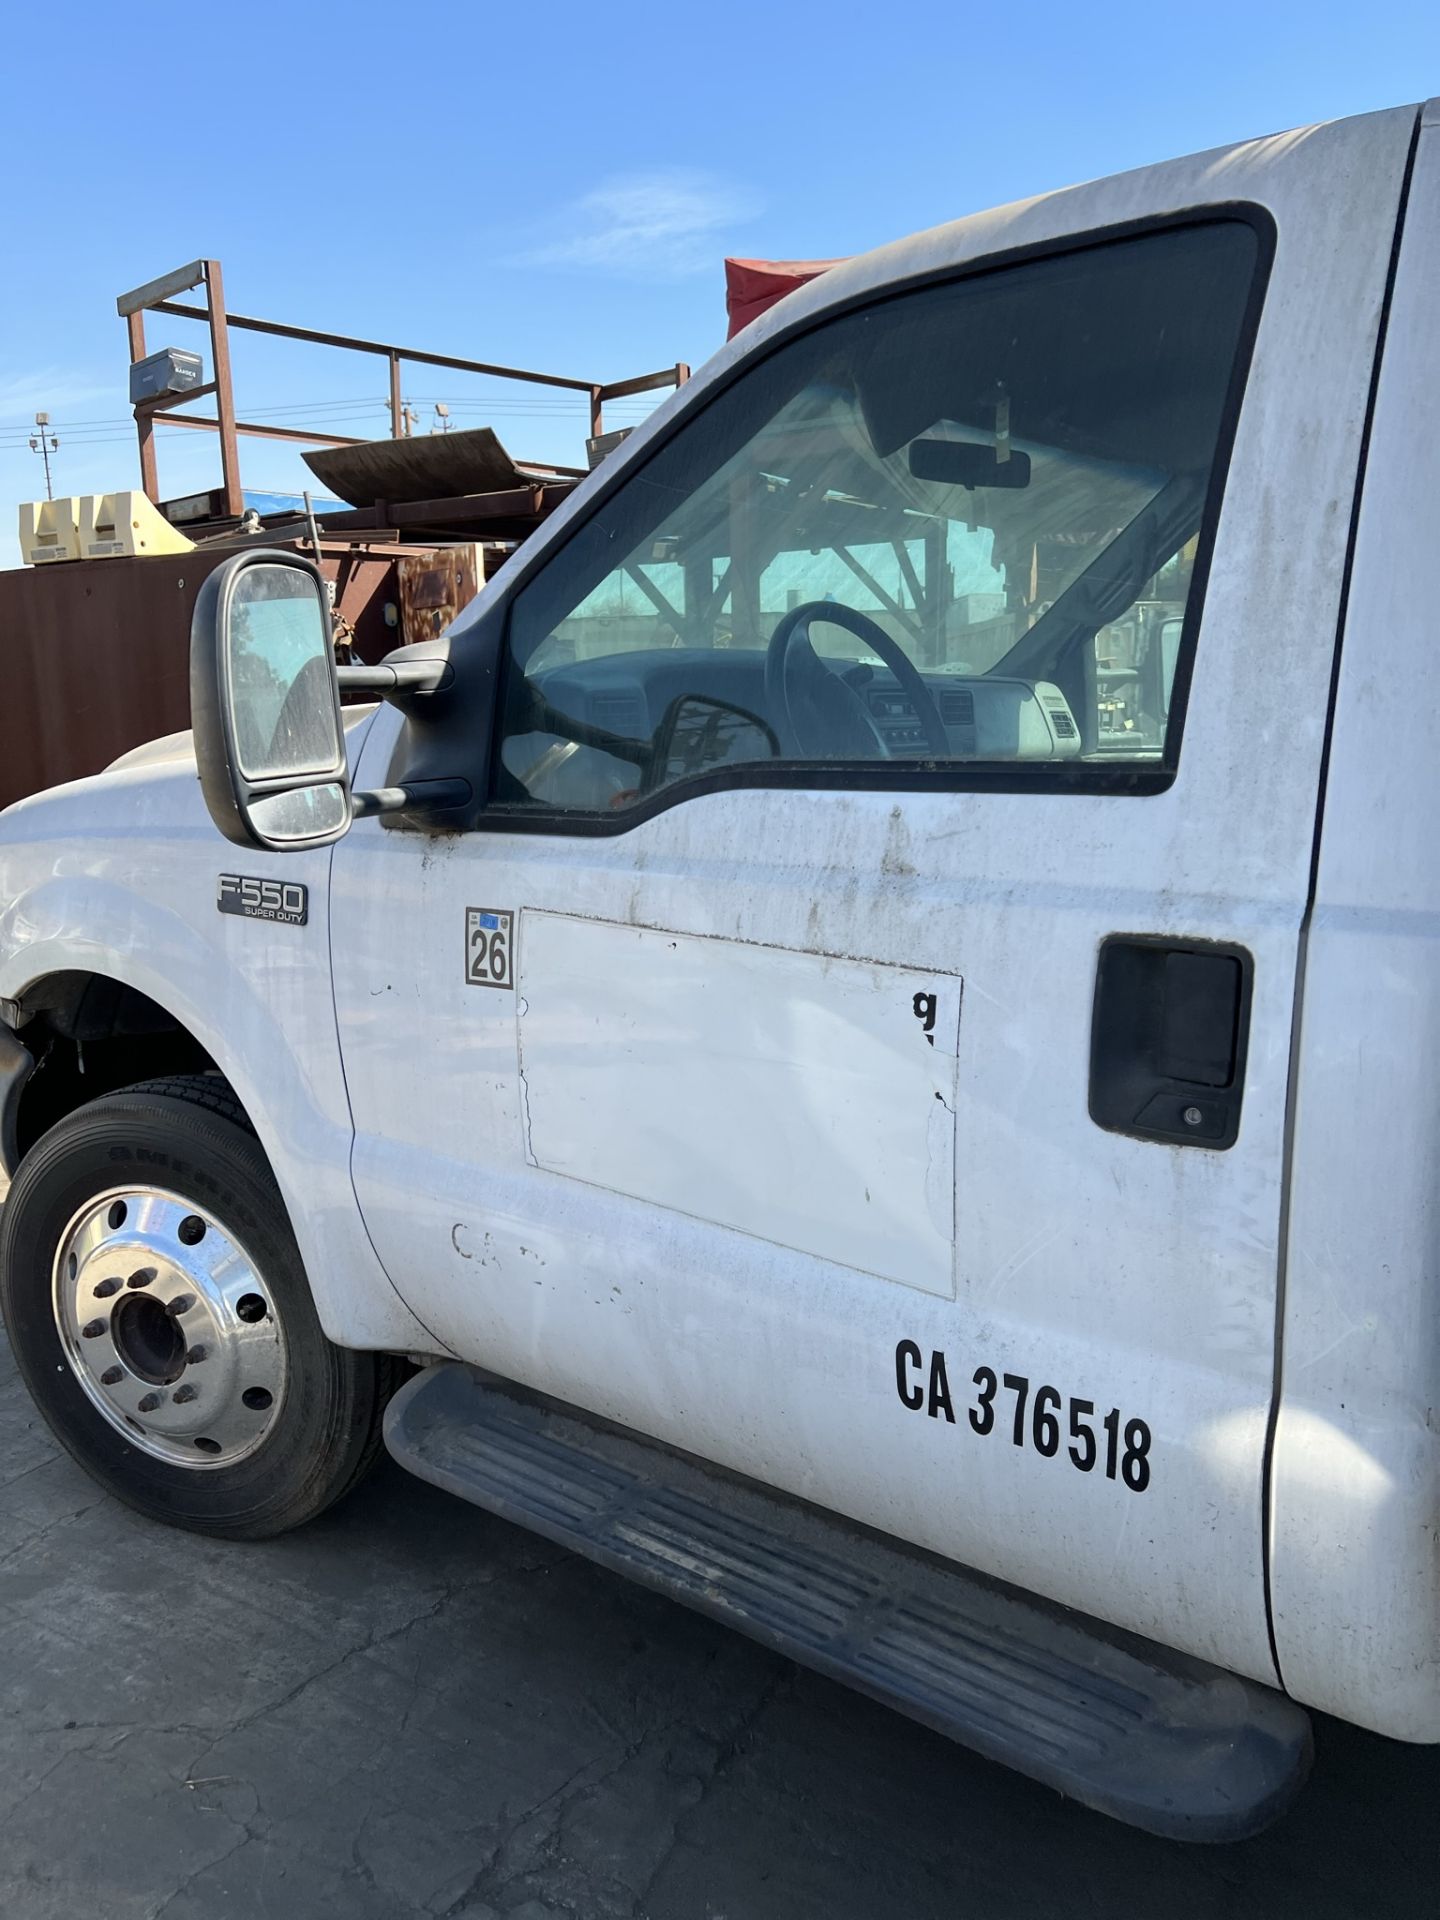 1999 FORD F550 SUPER DUTY, STAKE BED TRUCK, 16' BED, ENGINE NEEDS WORK, GASOLINE 6.8L ENGINE, GOOD - Image 6 of 14